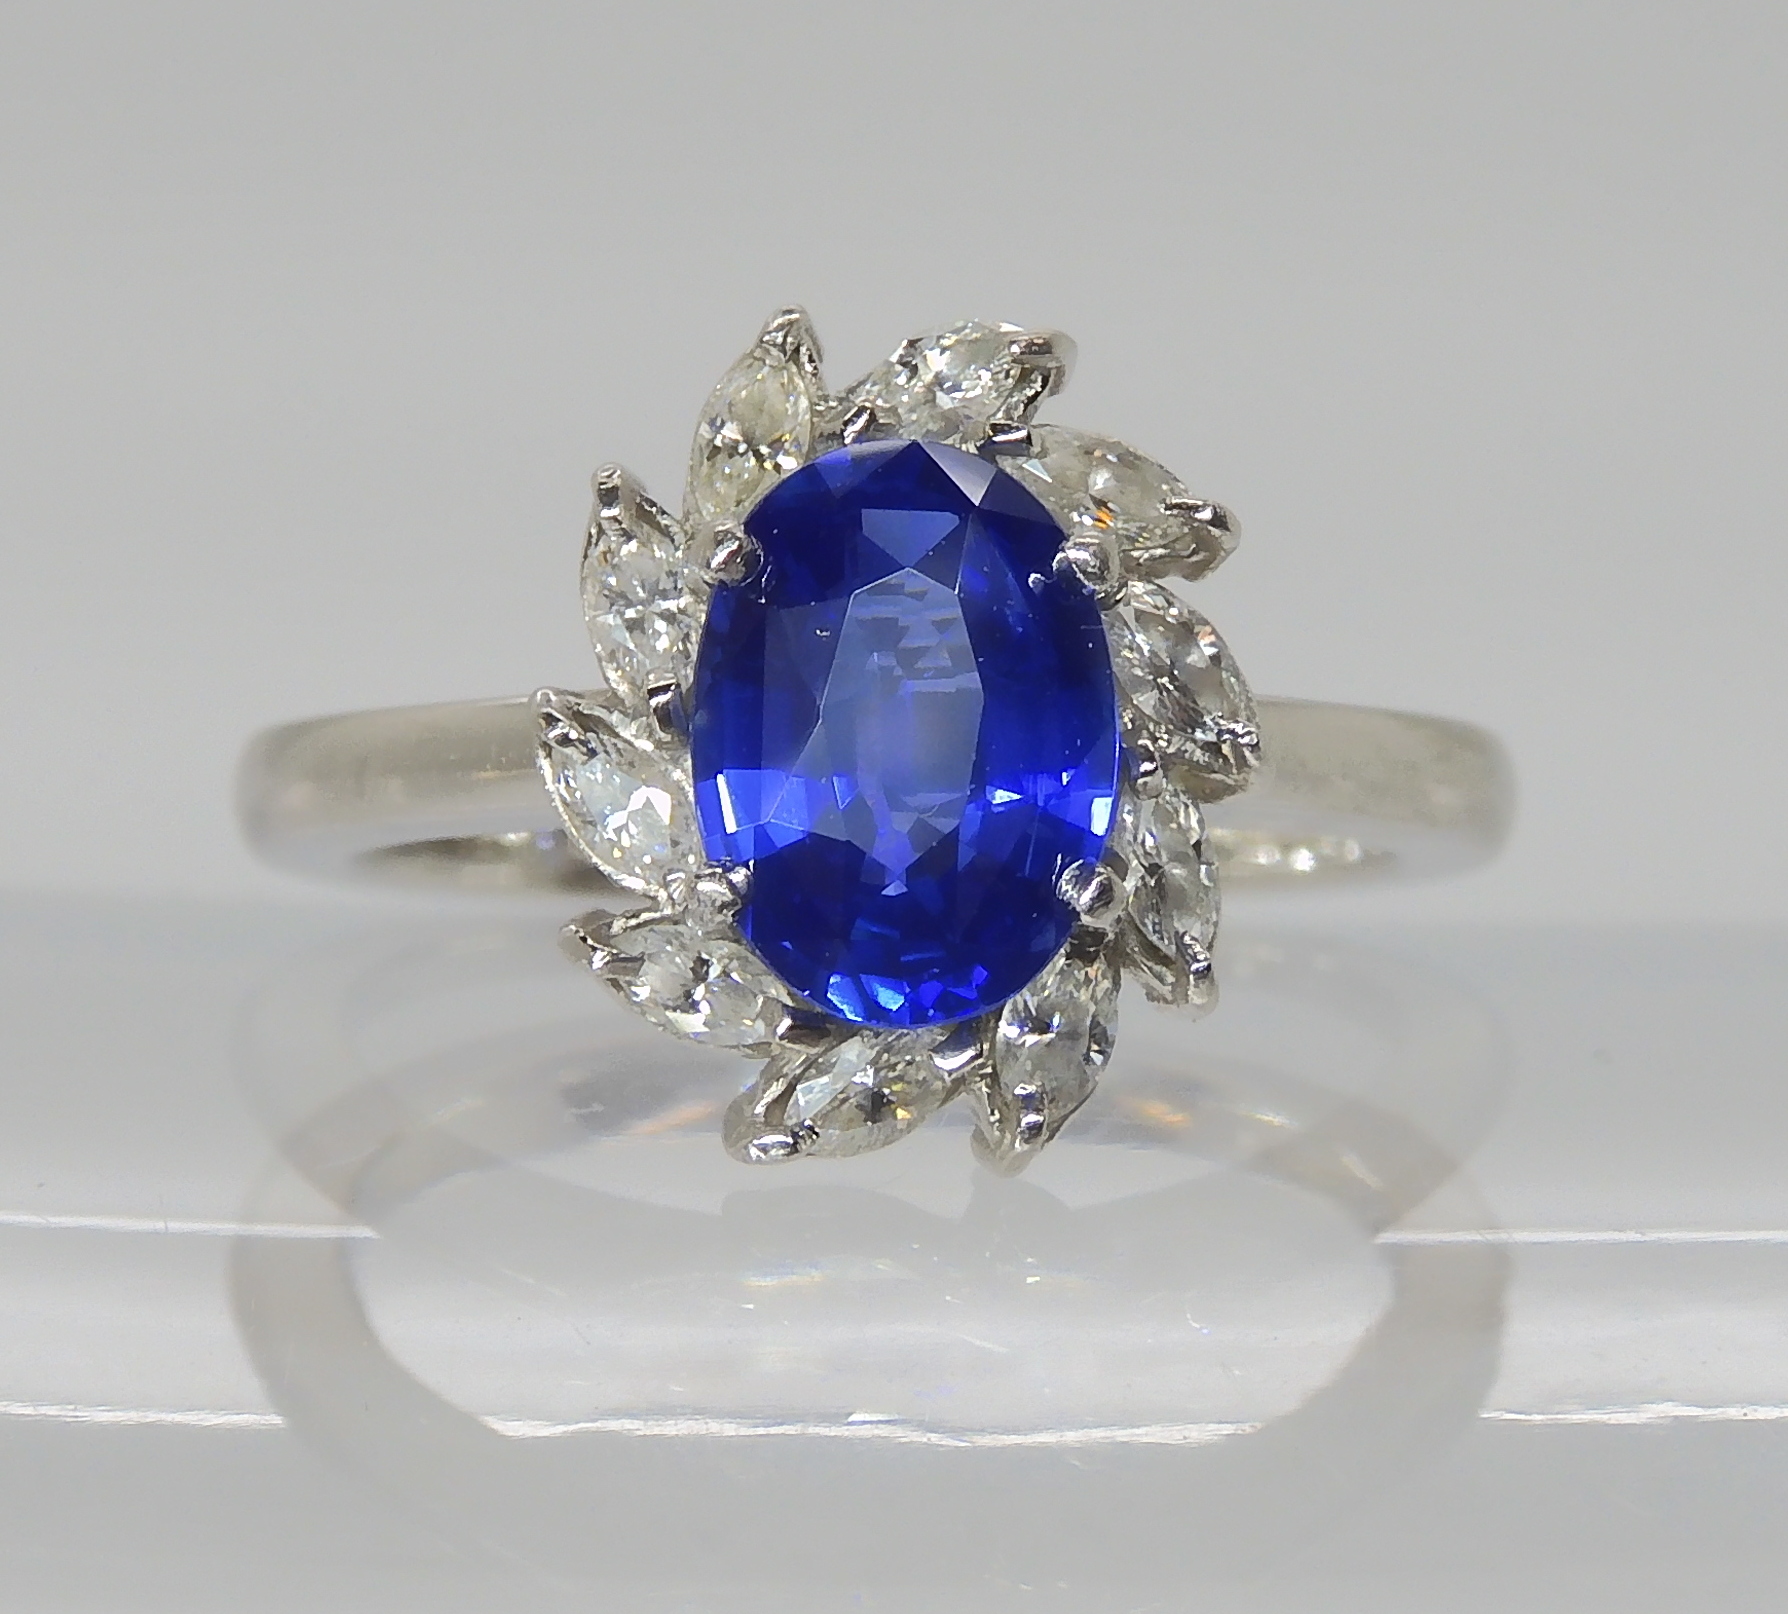 A PLATINUM SAPPHIRE AND DIAMOND RING made by Blair & Sheridan, the 8.2 x 5.9 x 3.5mm sapphire is - Image 2 of 5